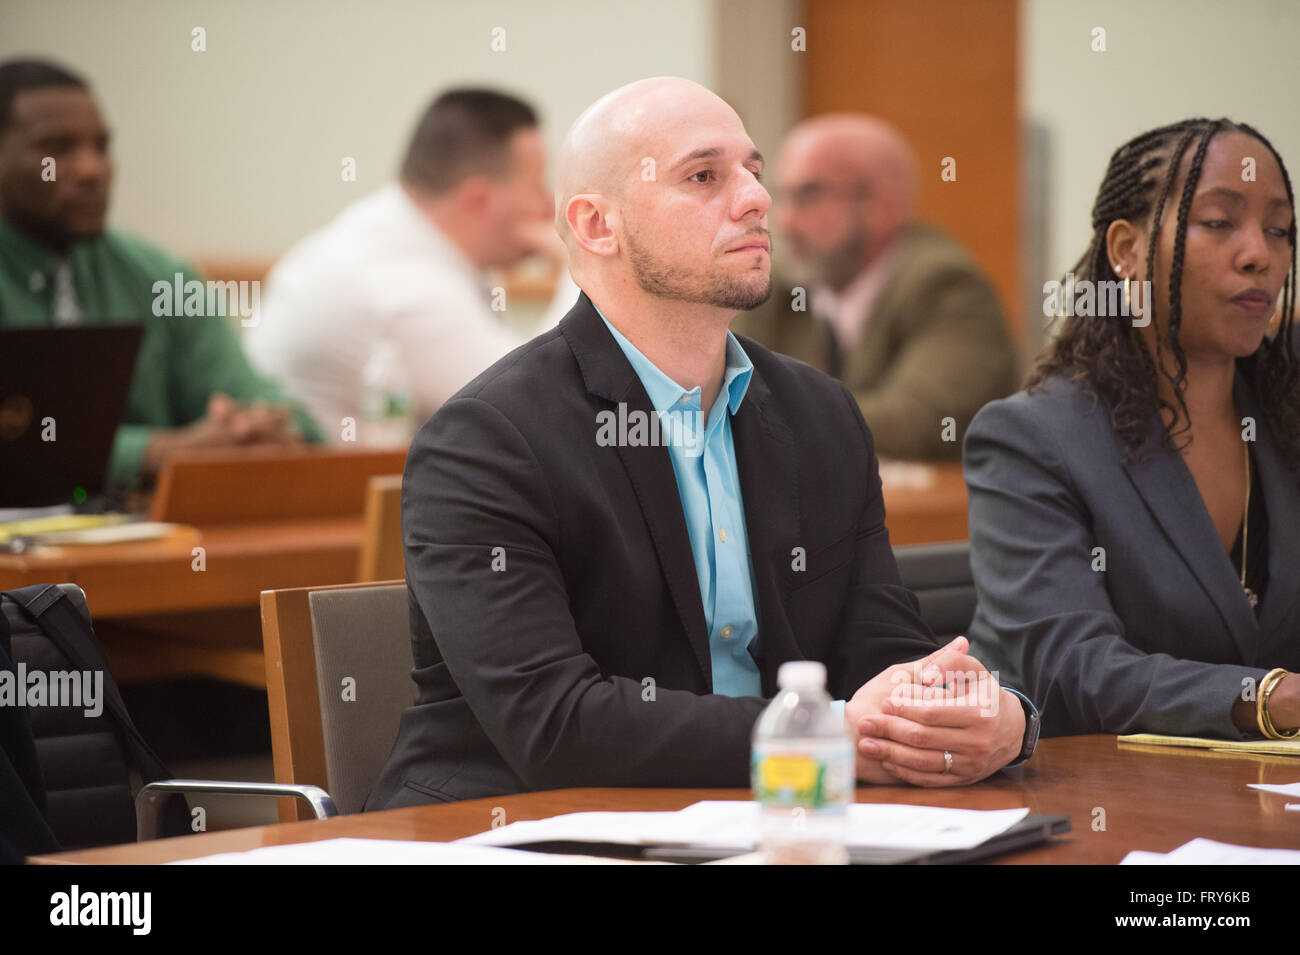 New York, NY, USA. 23rd Mar, 2016. Rikers Corrections Officer DAVID RODRIGUEZ in the courtroom on opening day in the Bronx Supreme Court trial of Rikers Island Correction Officers in the beating of inmate Jahmal Lightfoot Wednesday, March 23, 2016. © Bryan Smith/ZUMA Wire/Alamy Live News Stock Photo